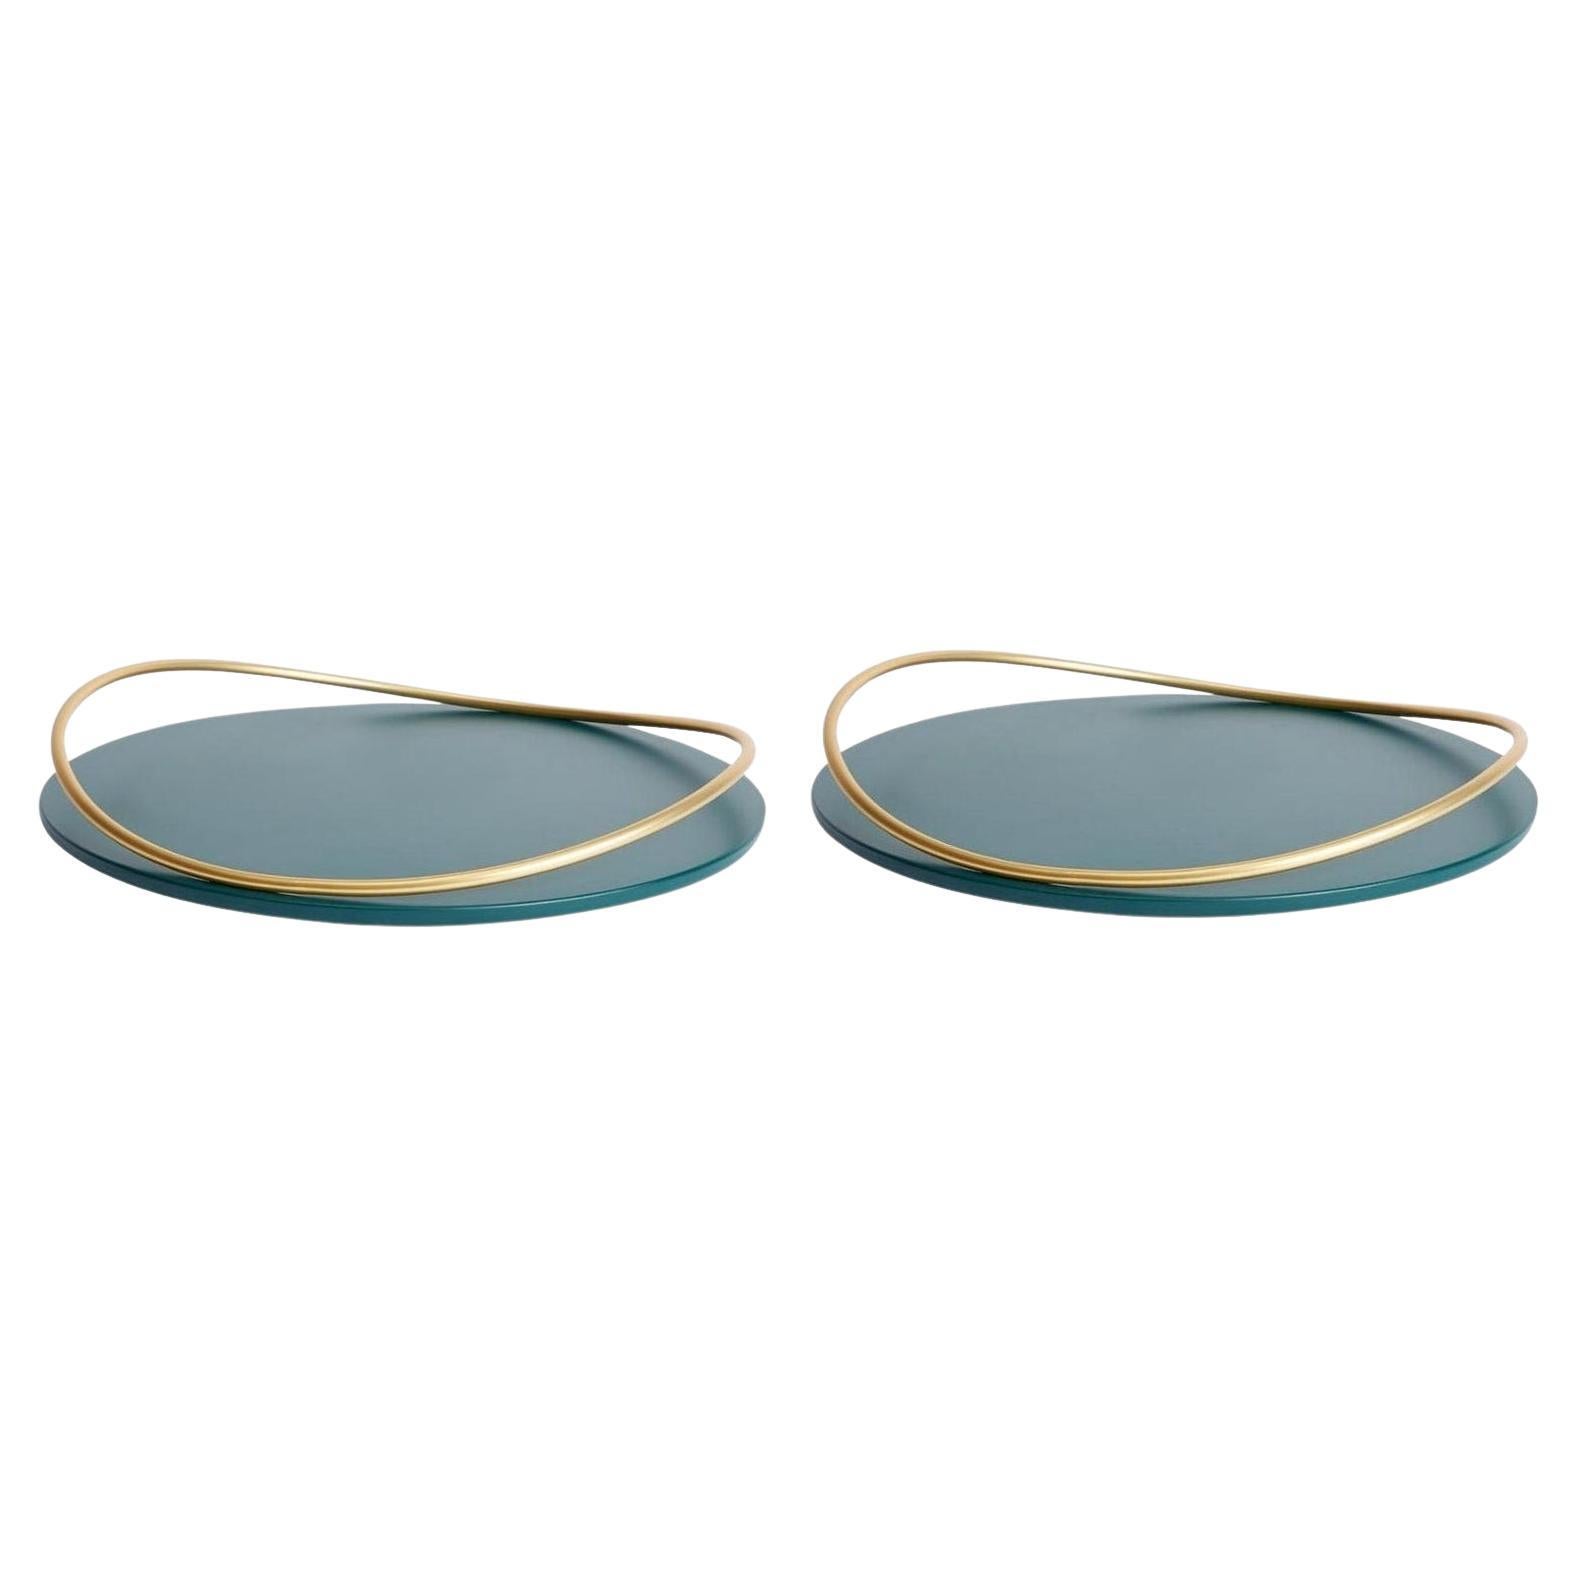 Pair of Petrol Green Touché a Trays by Mason Editions For Sale